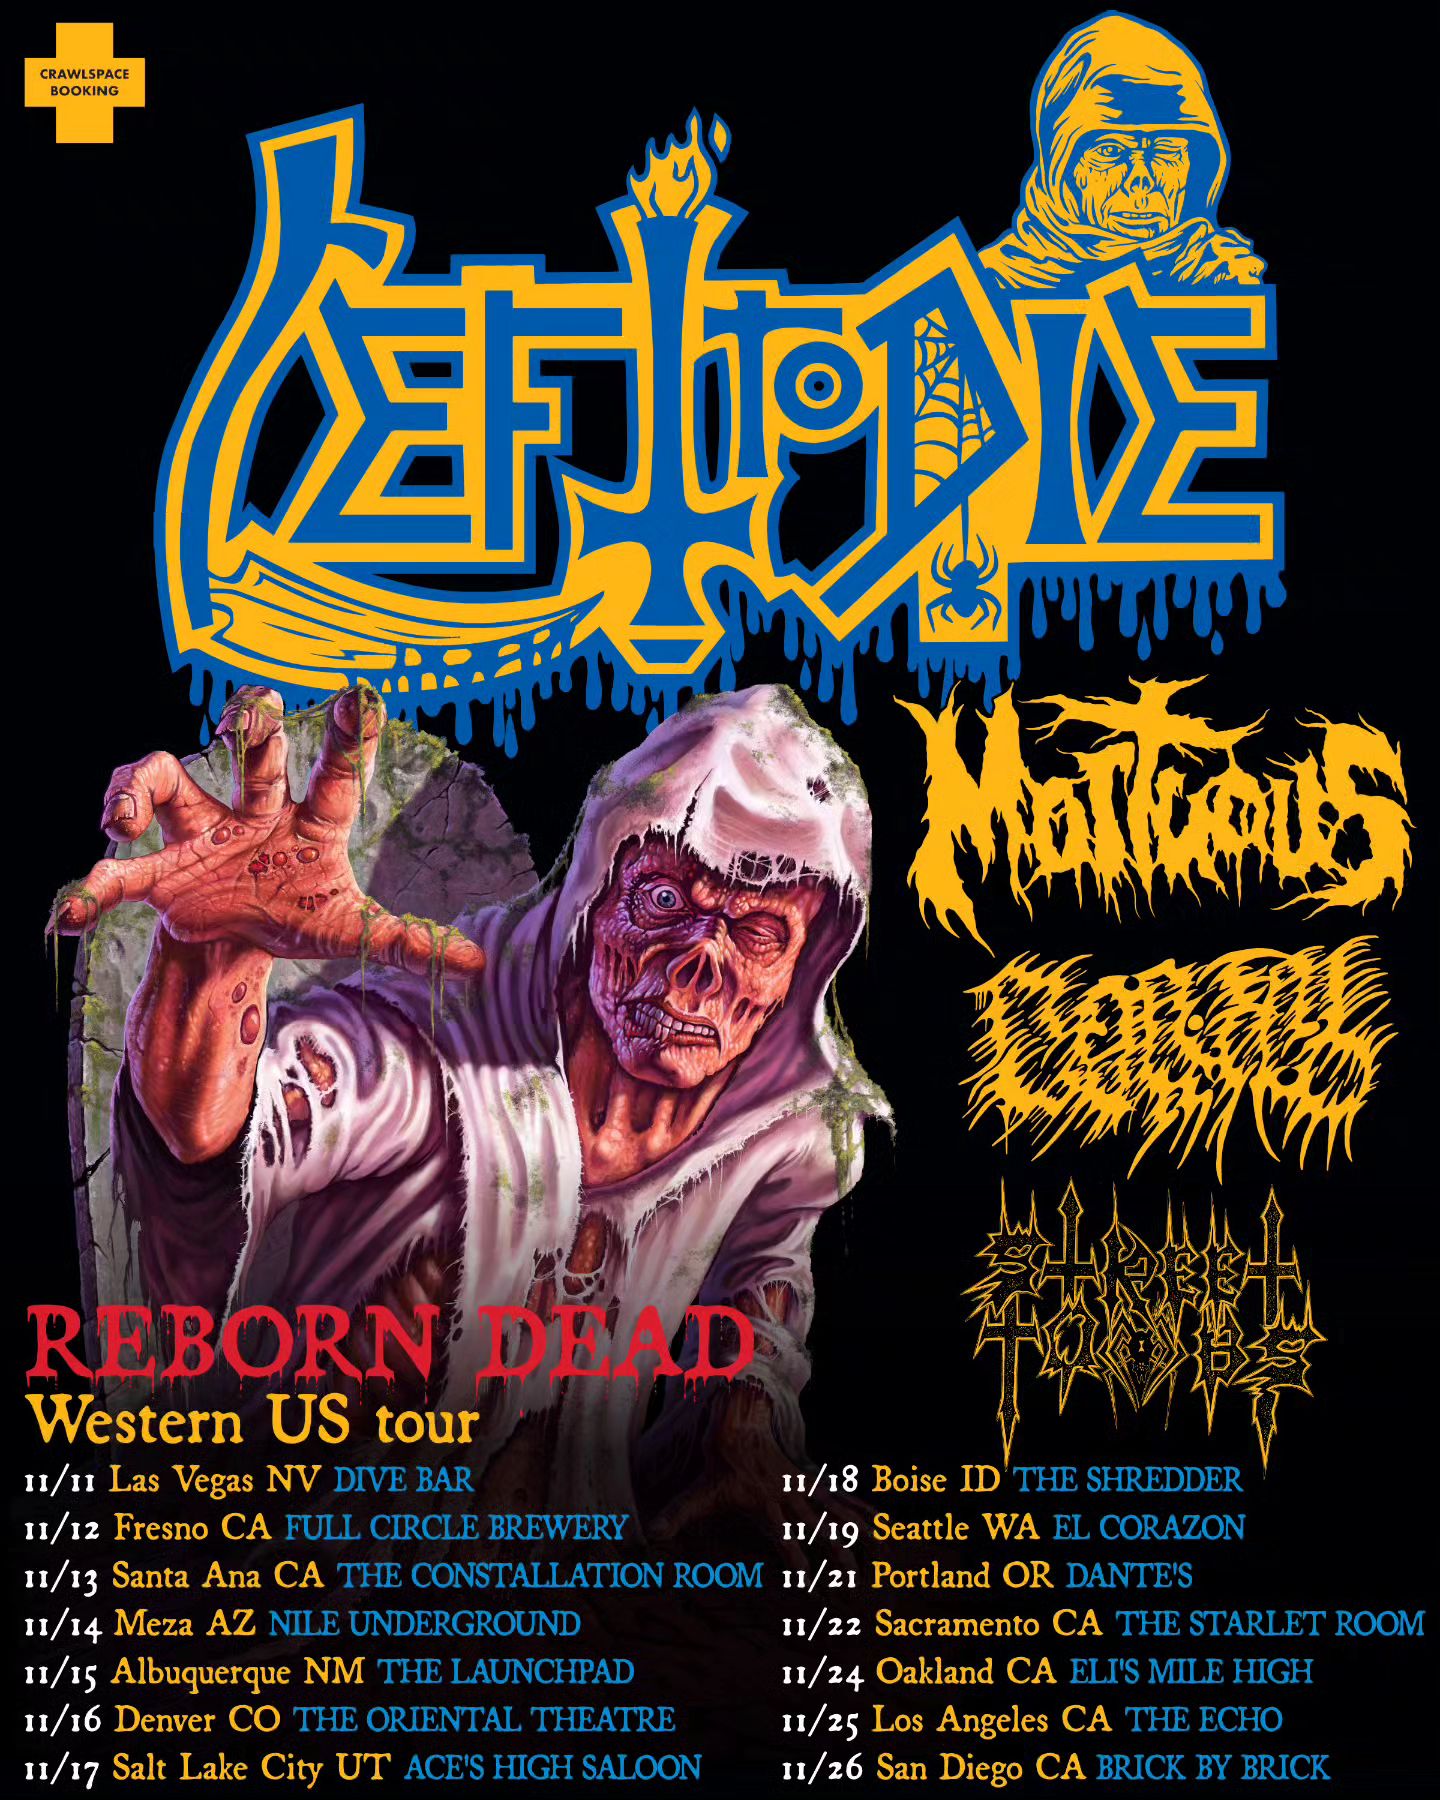 Left To Die, Mortuous, Mortal Wound Street Tombs